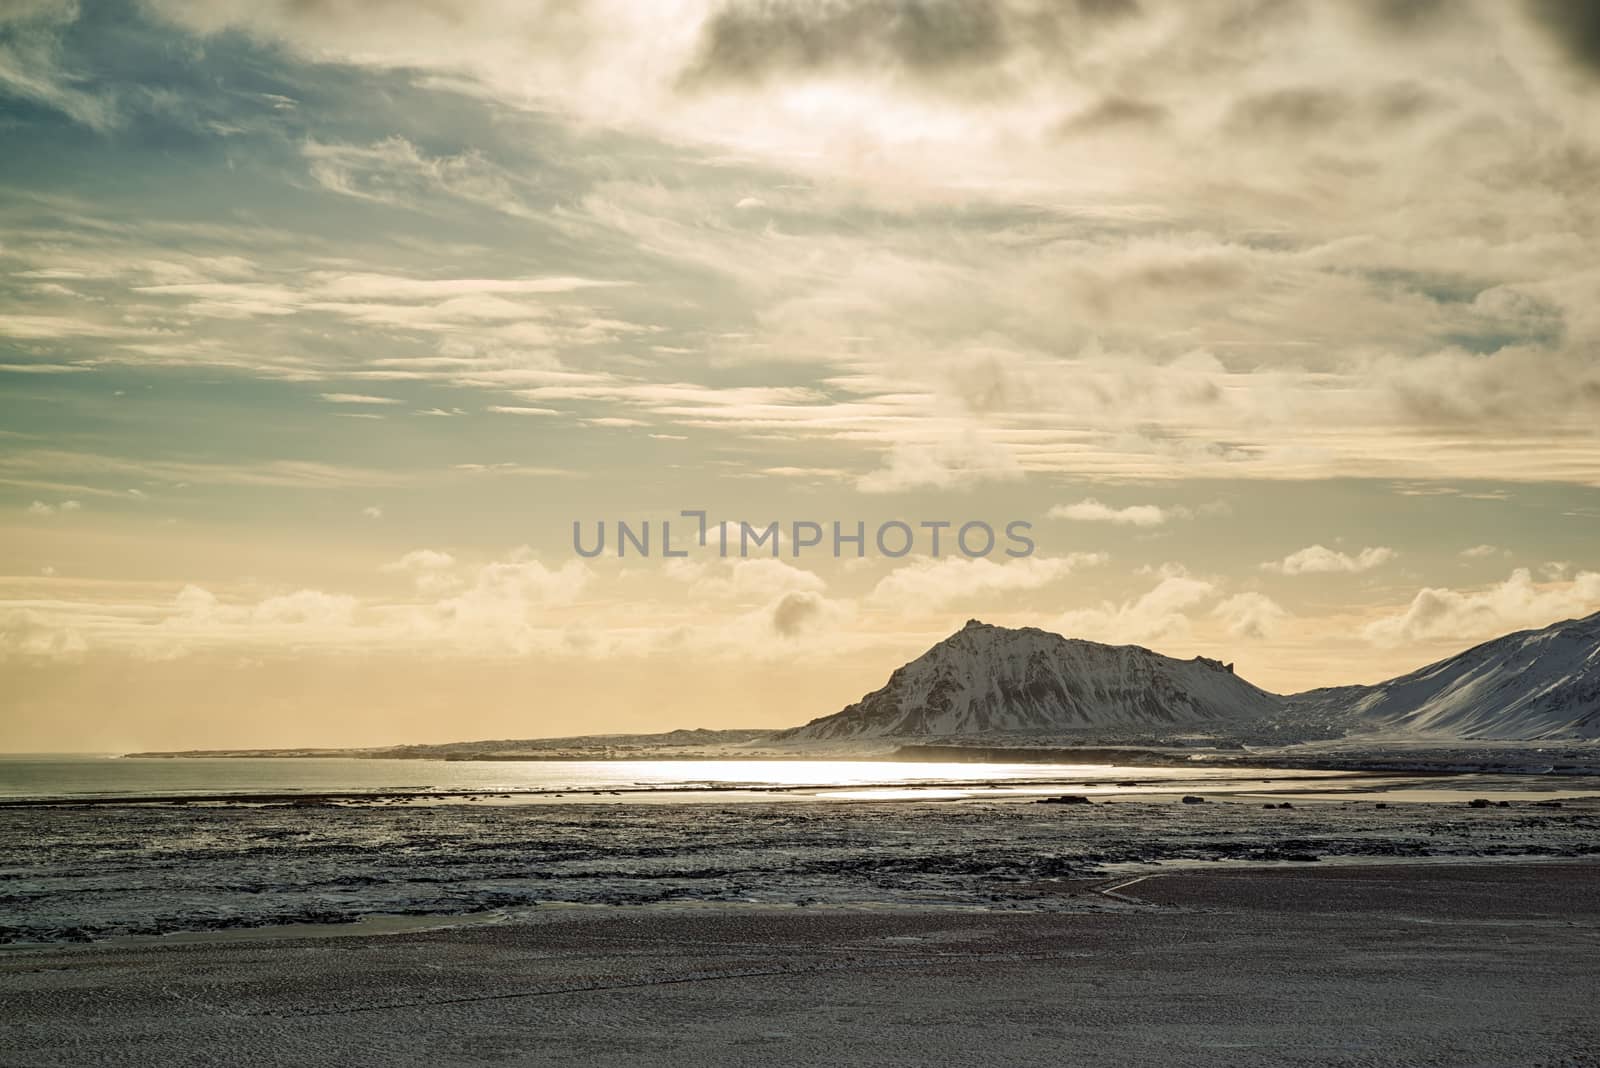 Mountains with the sun reflected in the water, Iceland by LuigiMorbidelli